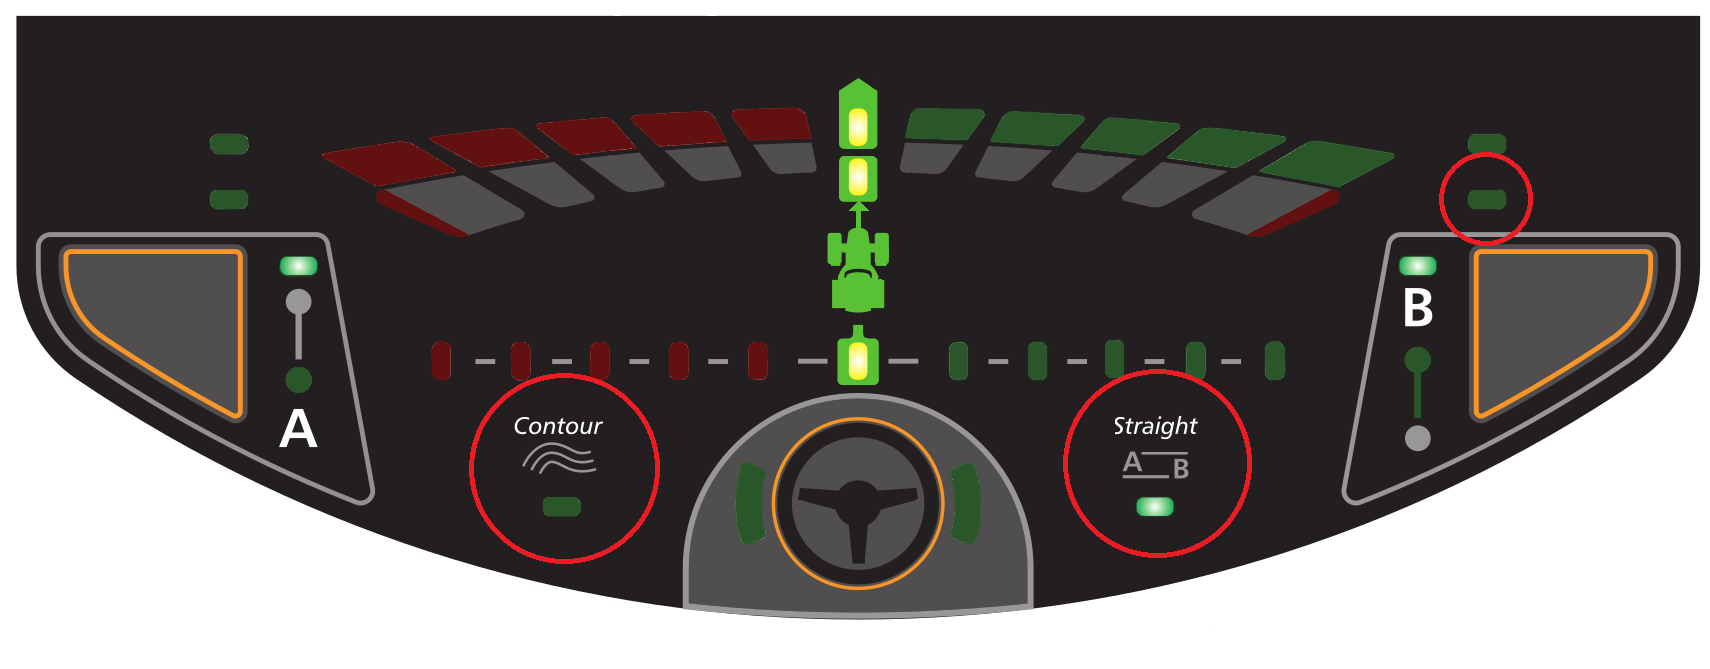 Dashboard_Straight_mode_circled.png